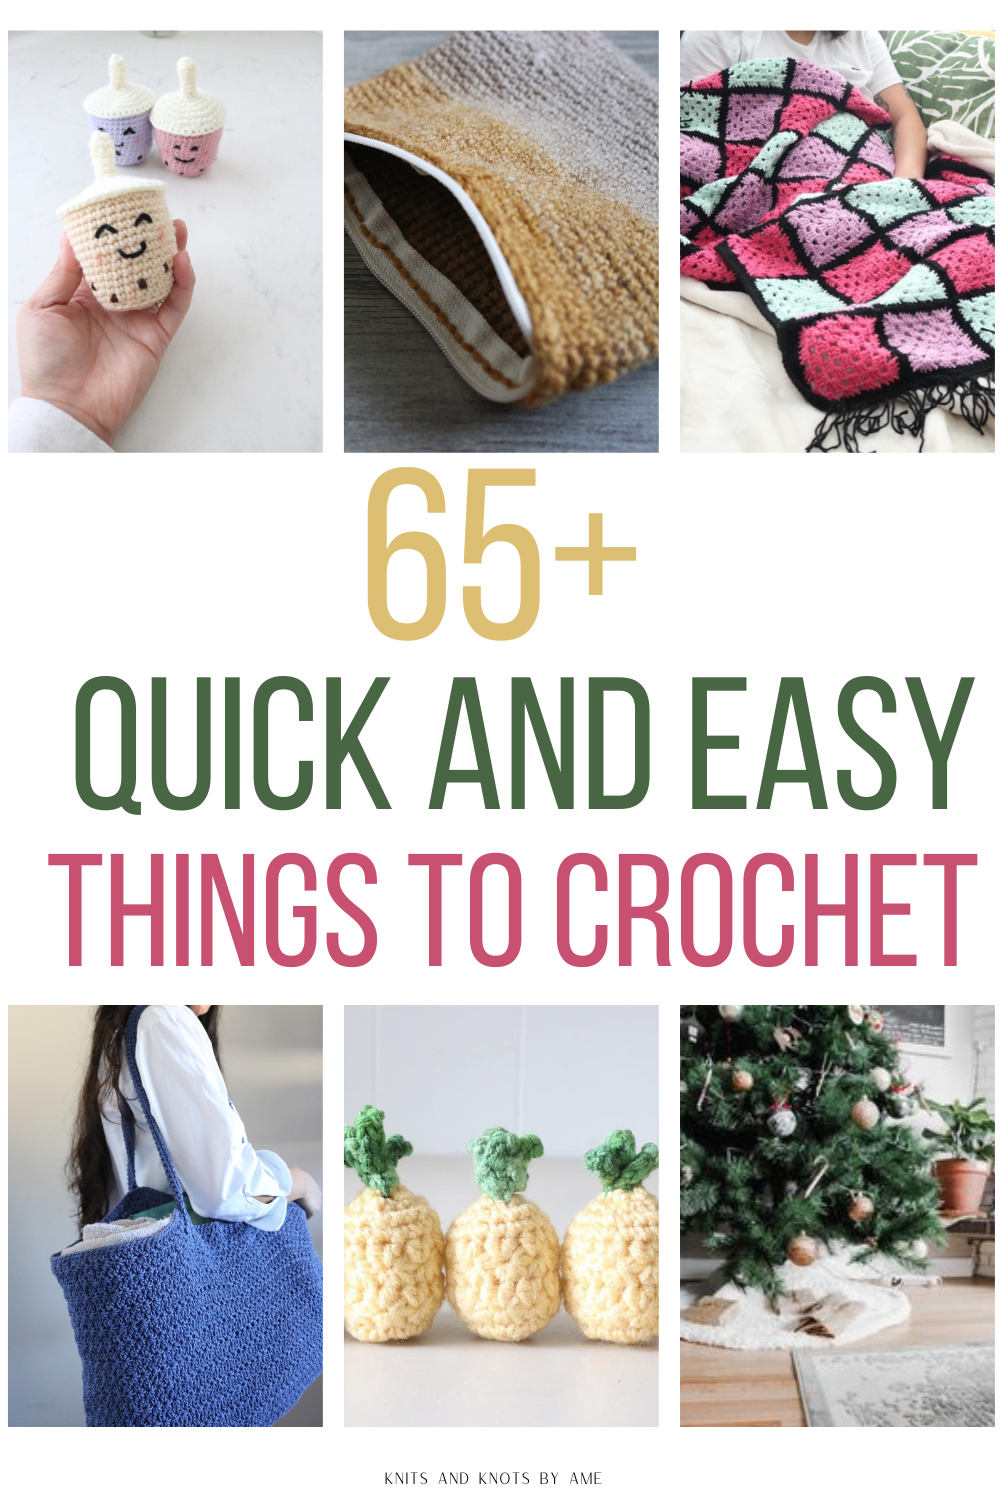 35+ Fast and Easy Crochet Gift Ideas Anyone Can Make  Quick crochet gifts, Crochet  gifts, Small crochet gifts